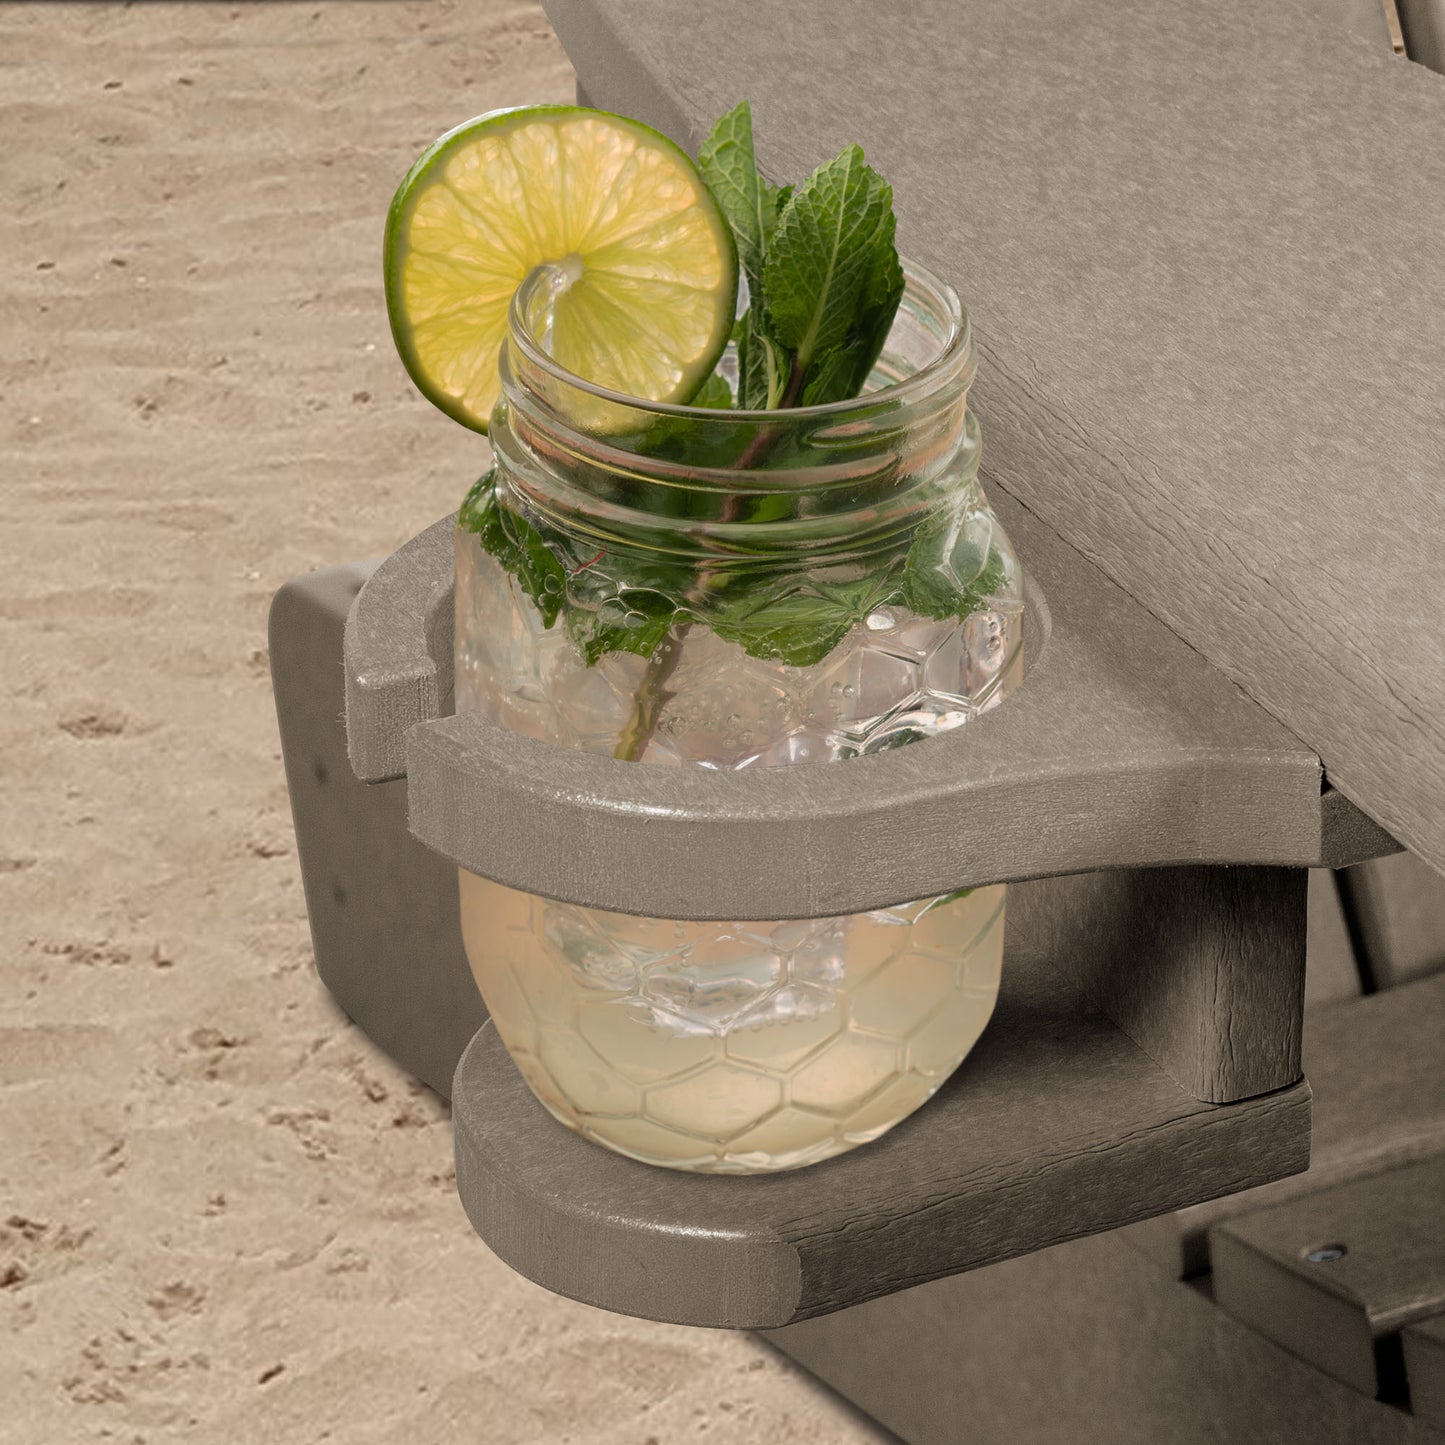 Tan Sunrise Coast cup holder with tropical drink